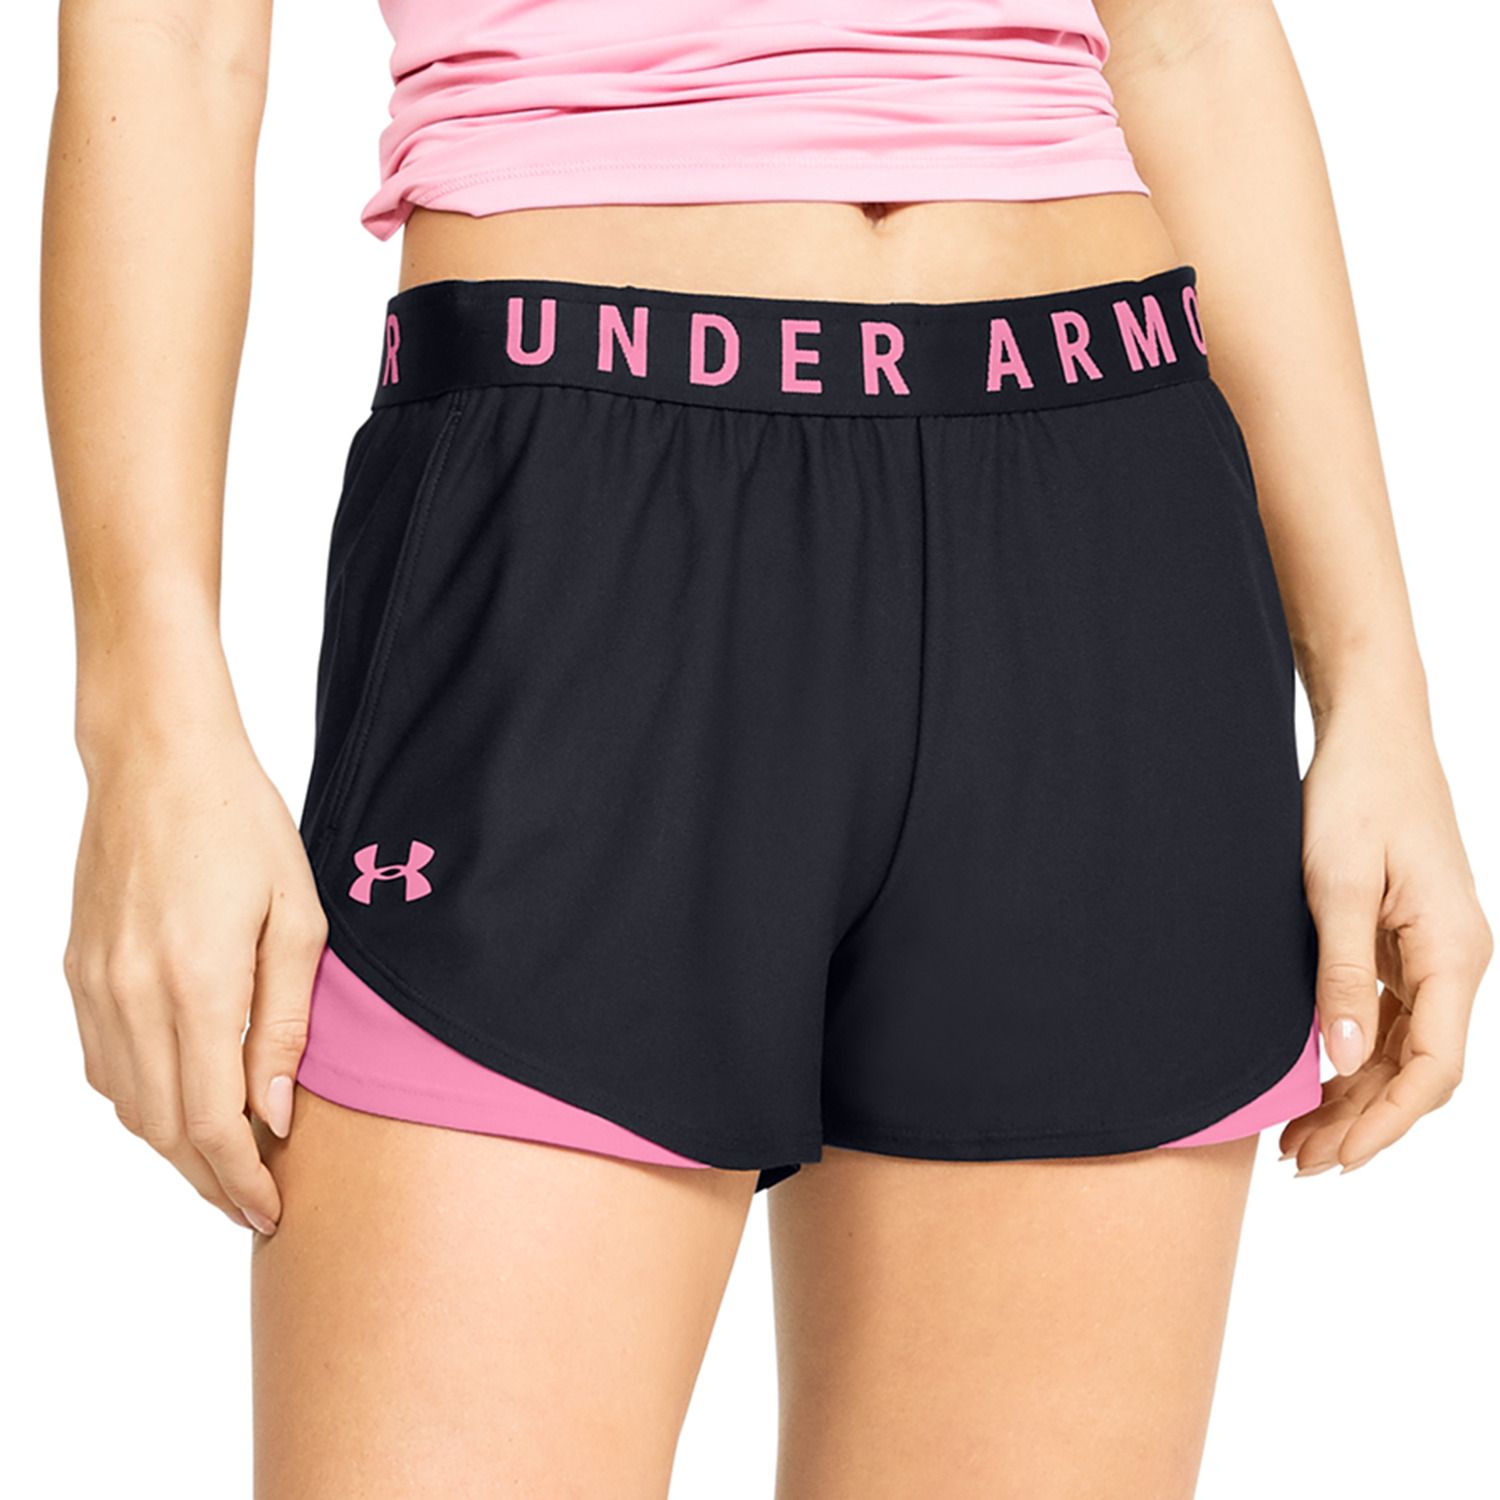 under armour shorts pink